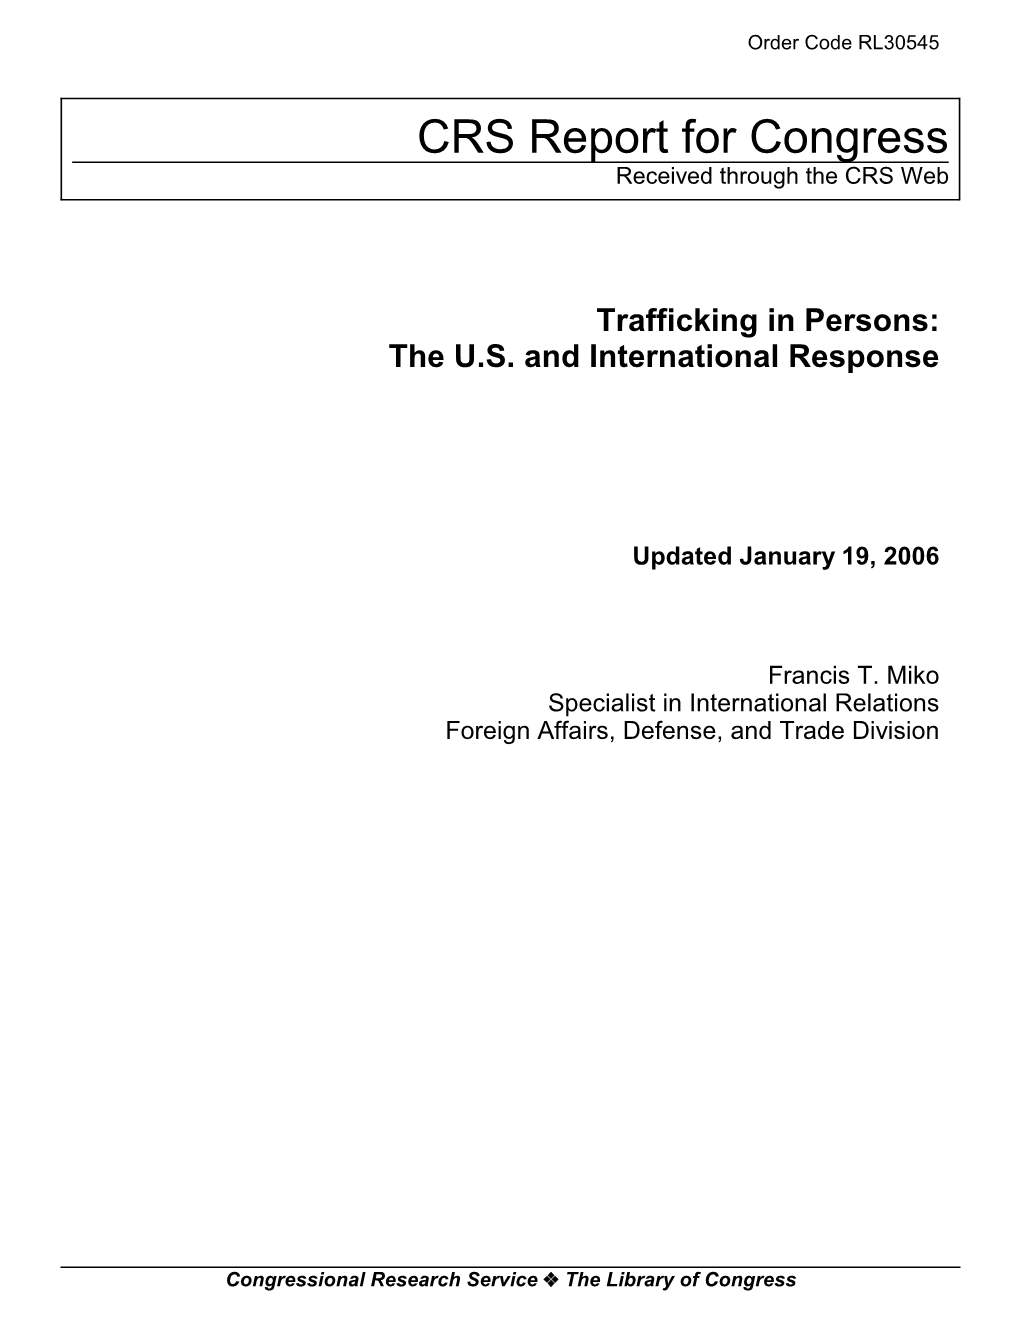 Trafficking in Persons: the U.S